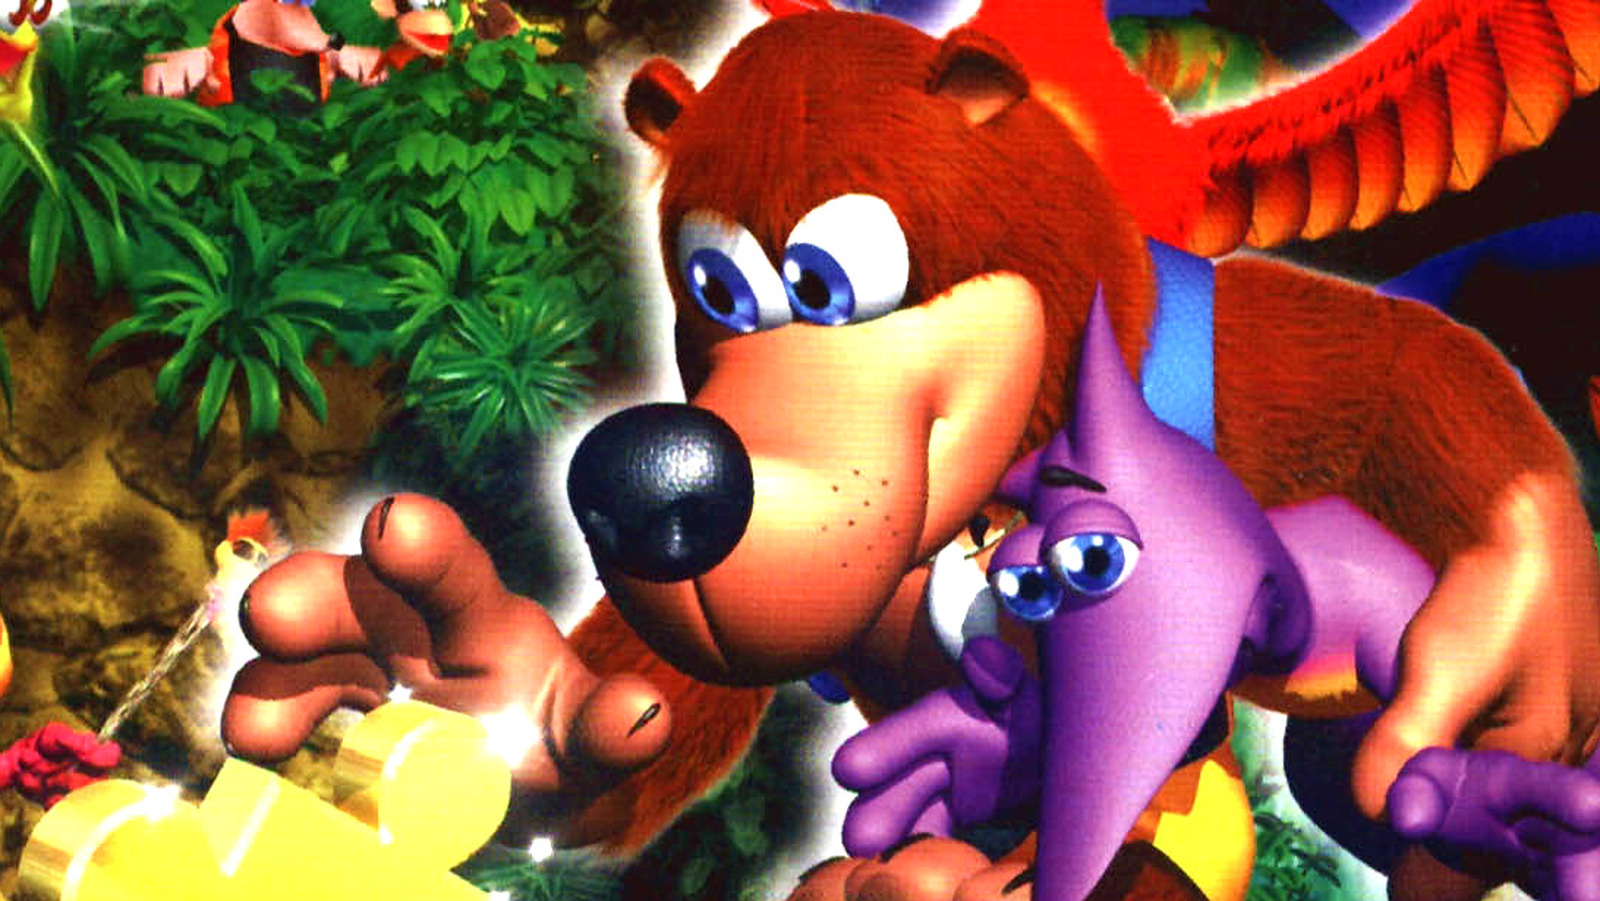 A New Banjo-Kazooie Game May Finally Be In Development